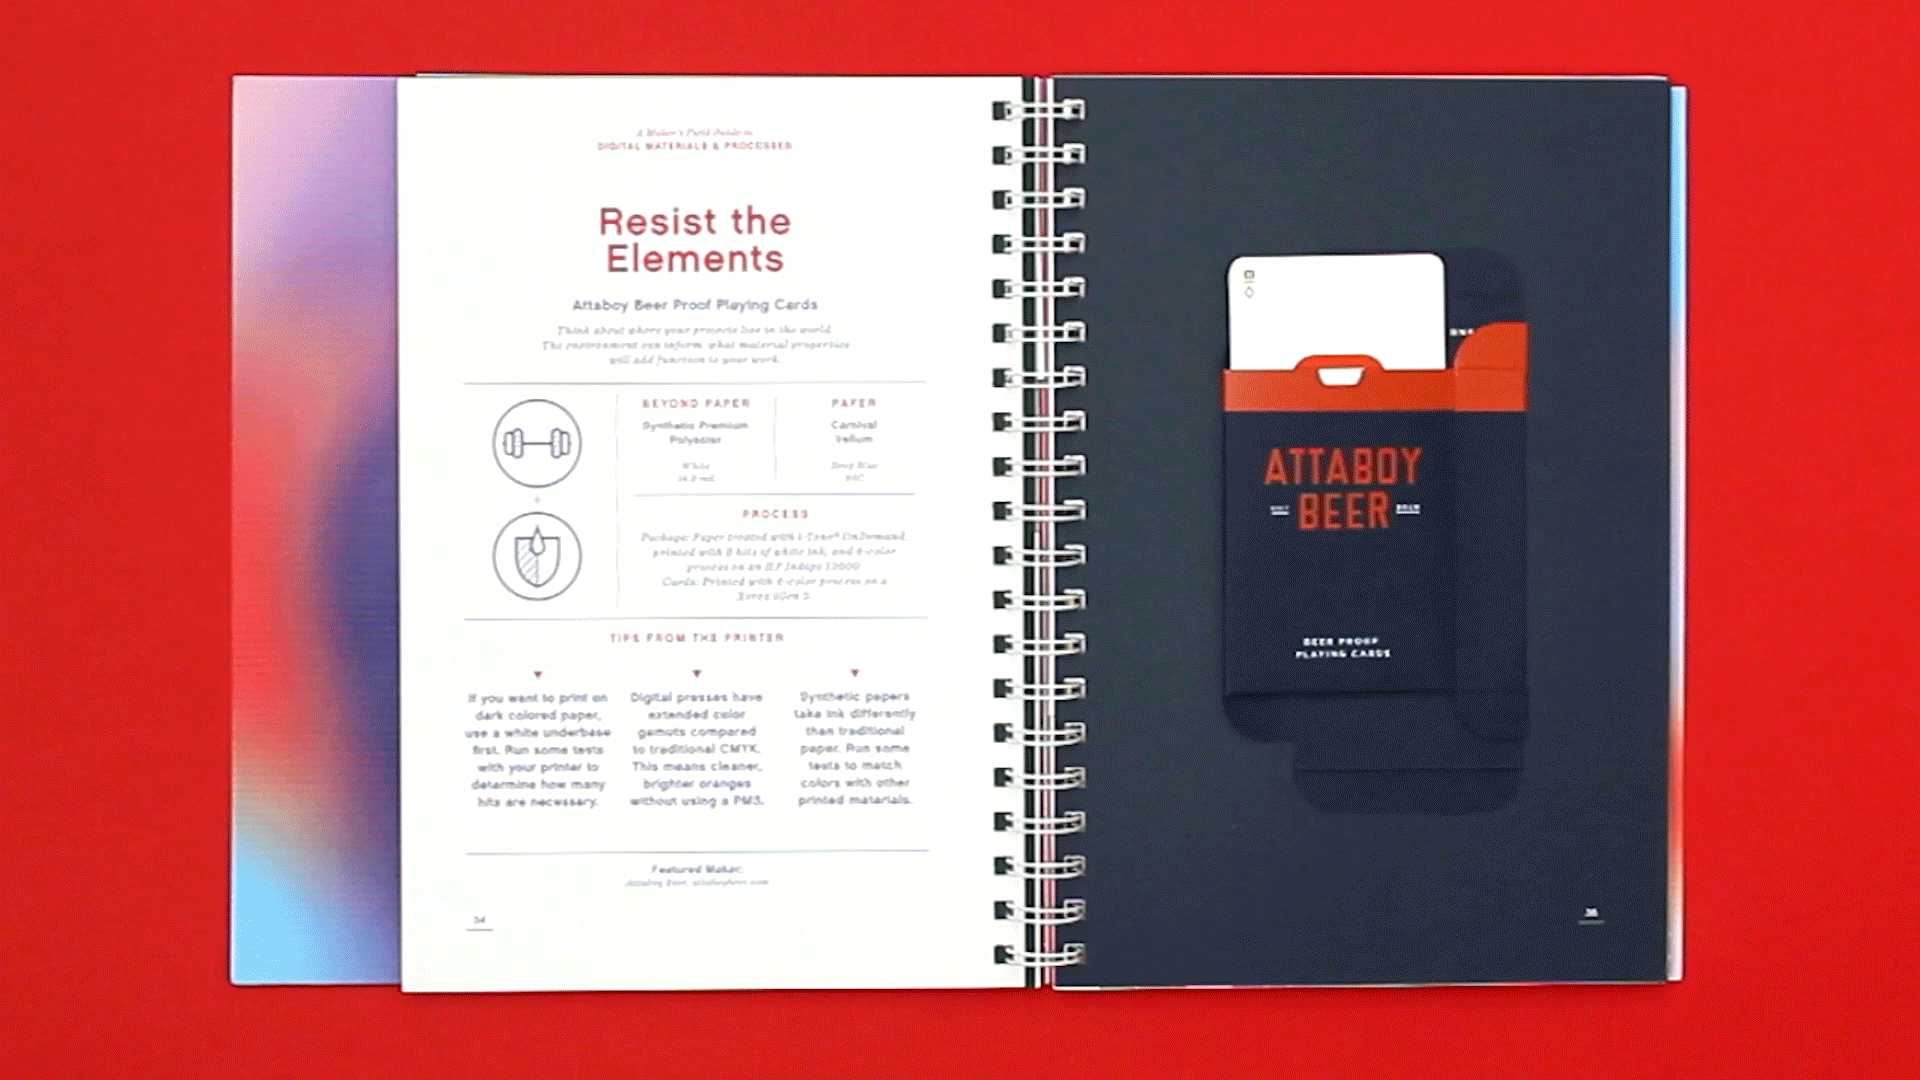 View of the Digital Field Guide laying open on red background